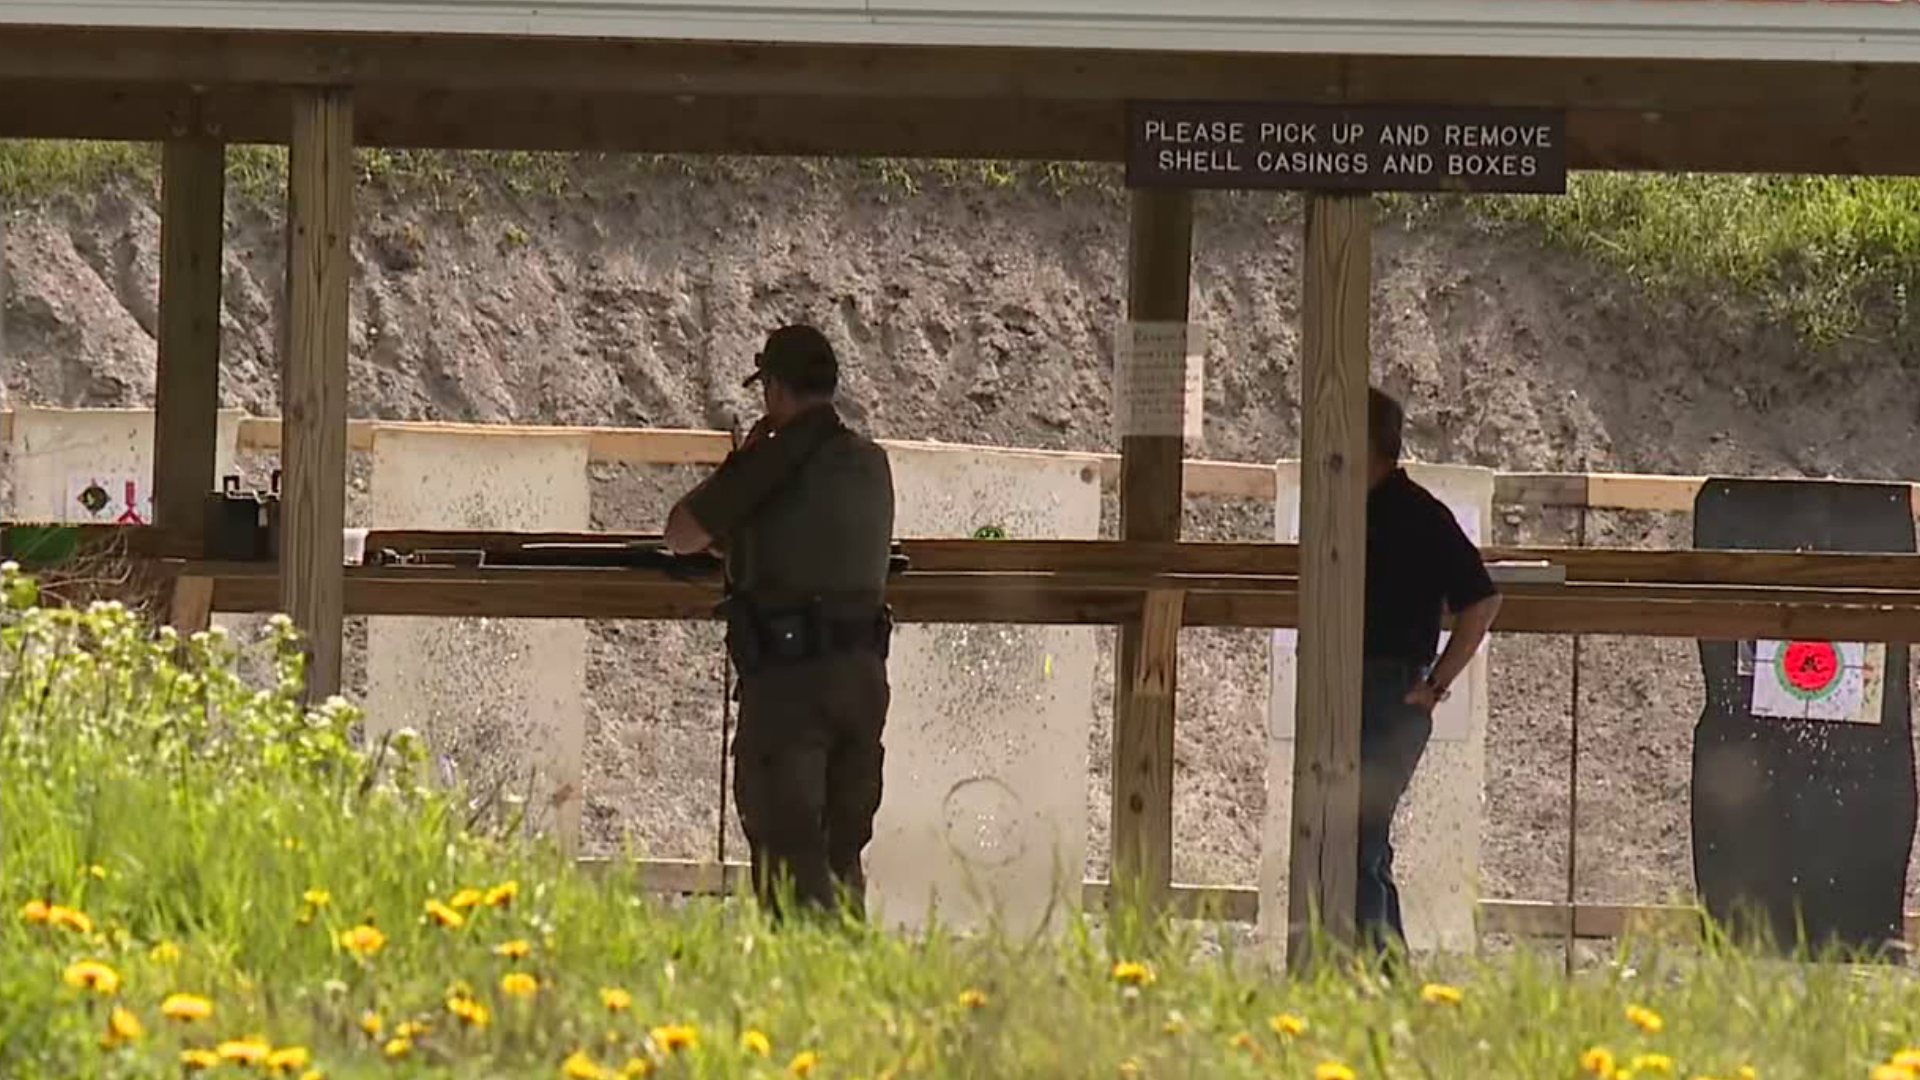 The incident happened on Saturday afternoon at a shooting range.